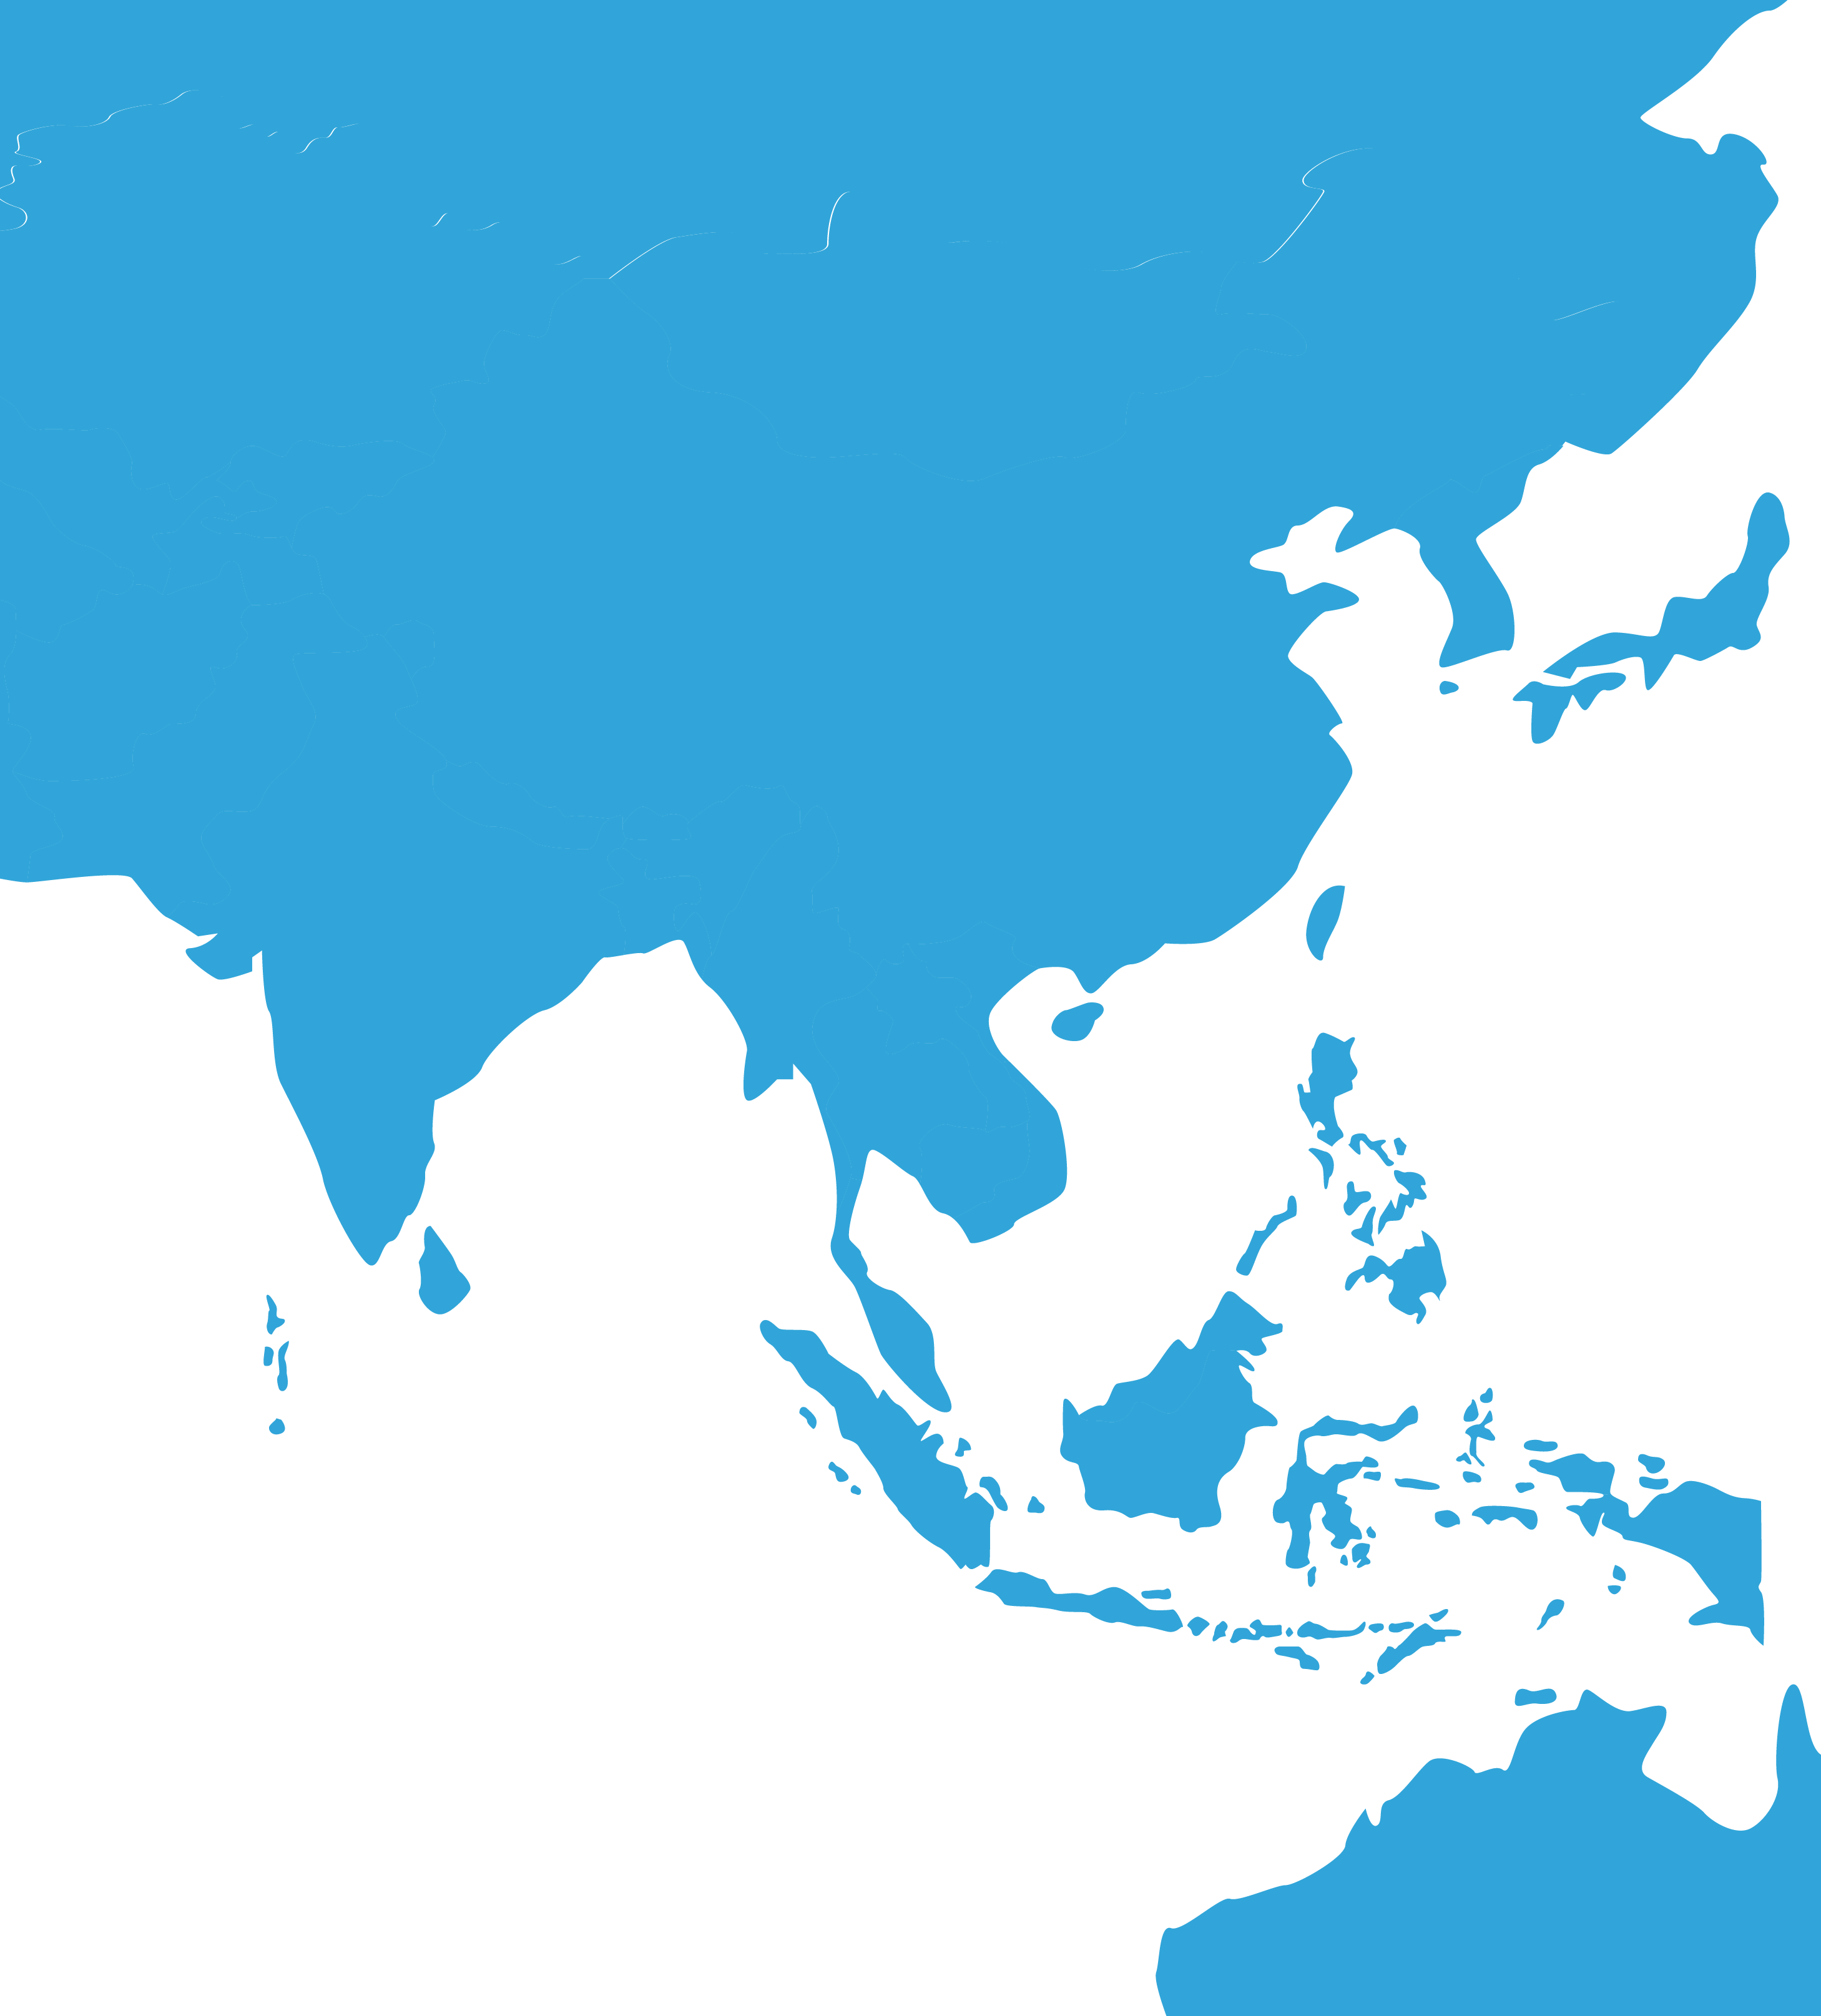 Map of Asia without borders